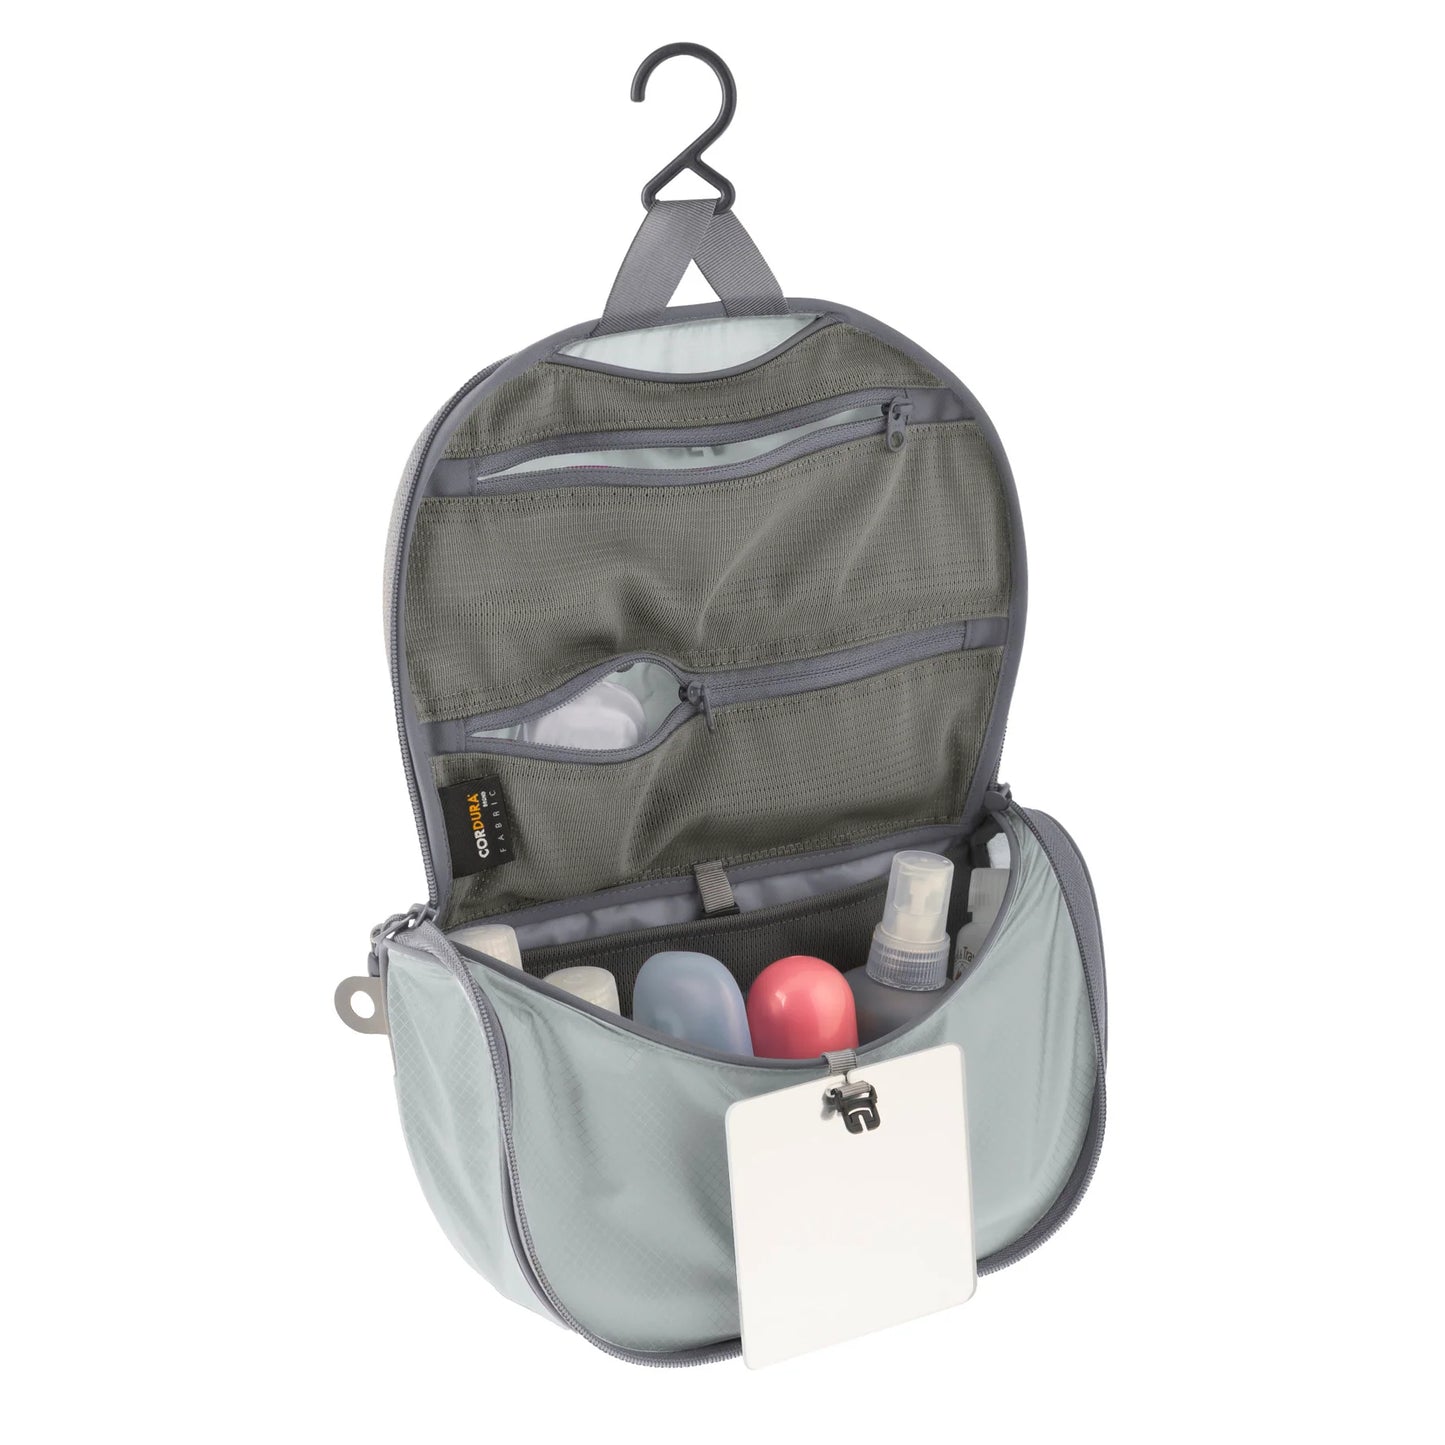 SEA TO SUMMIT HANGING TOILETRY BAG